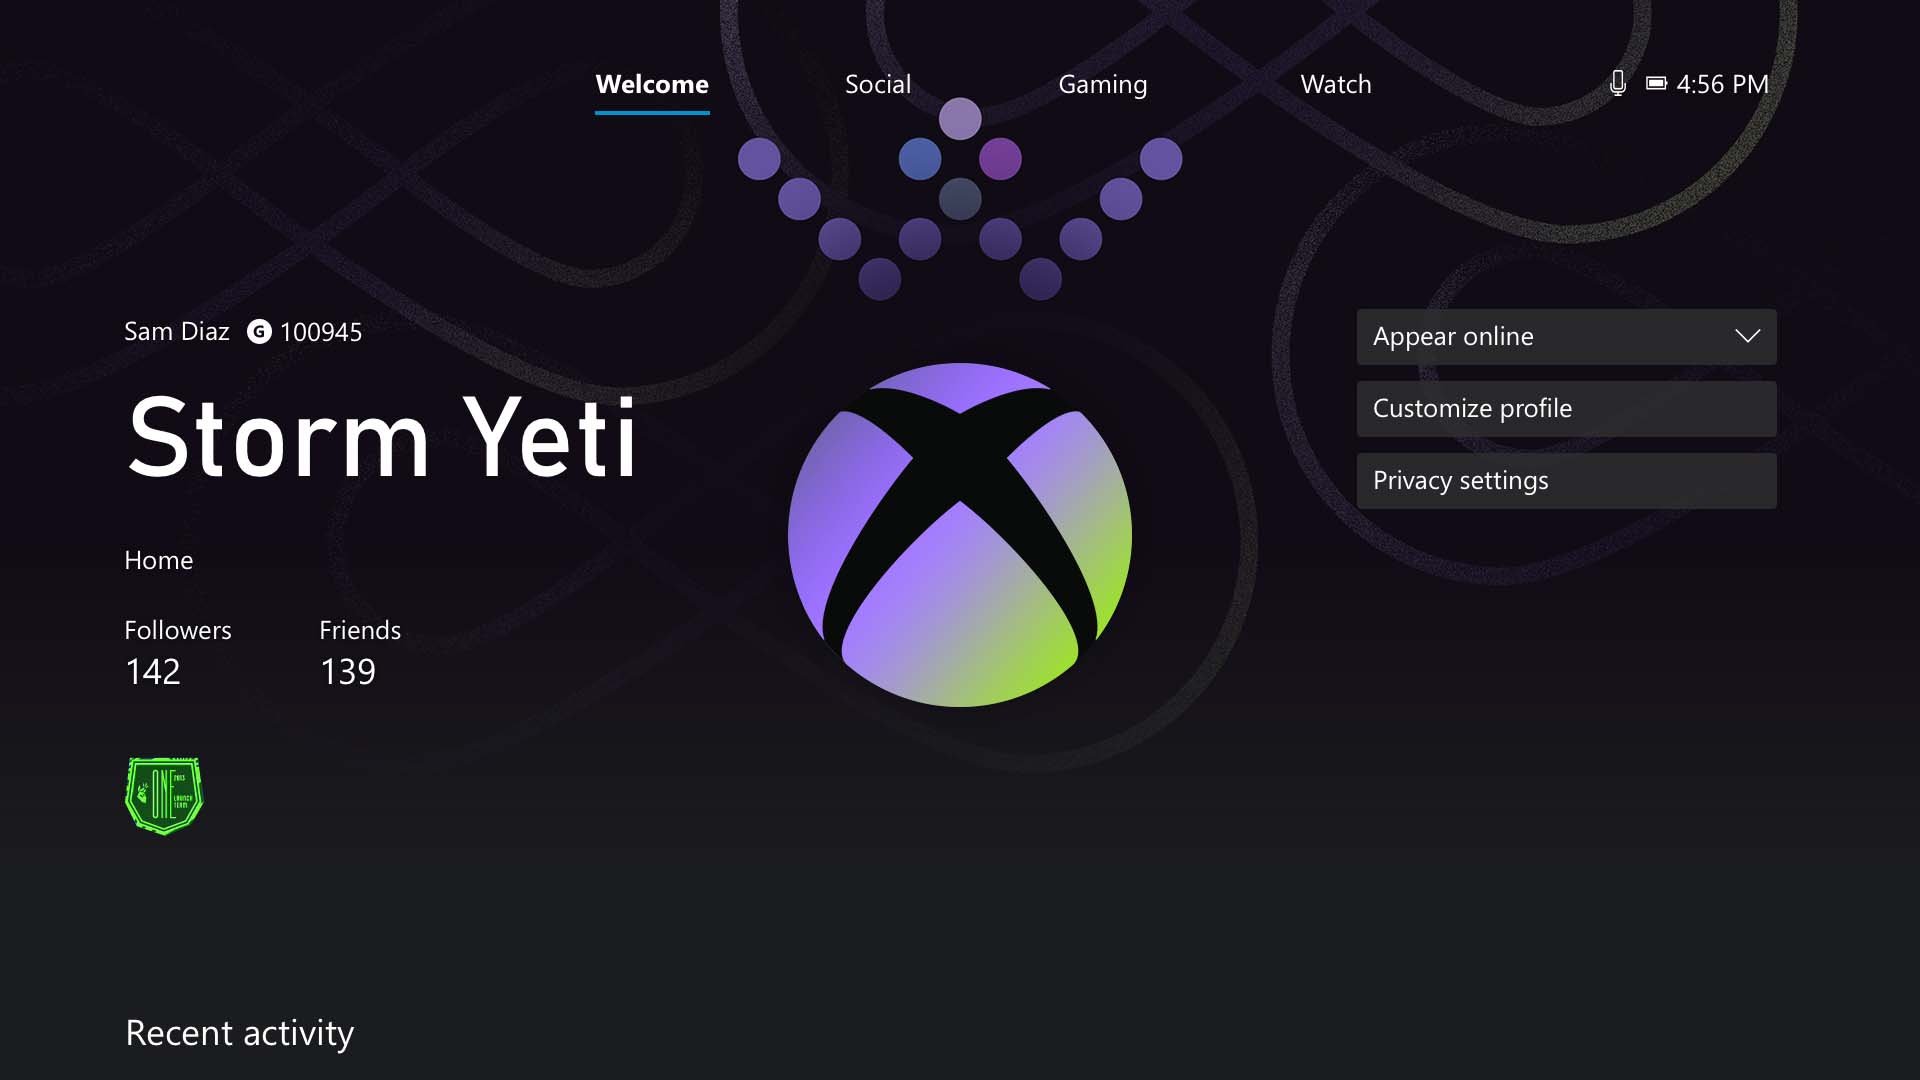 A screenshot of an Xbox profile using the Women’s History Month GamerPic and profile theme.